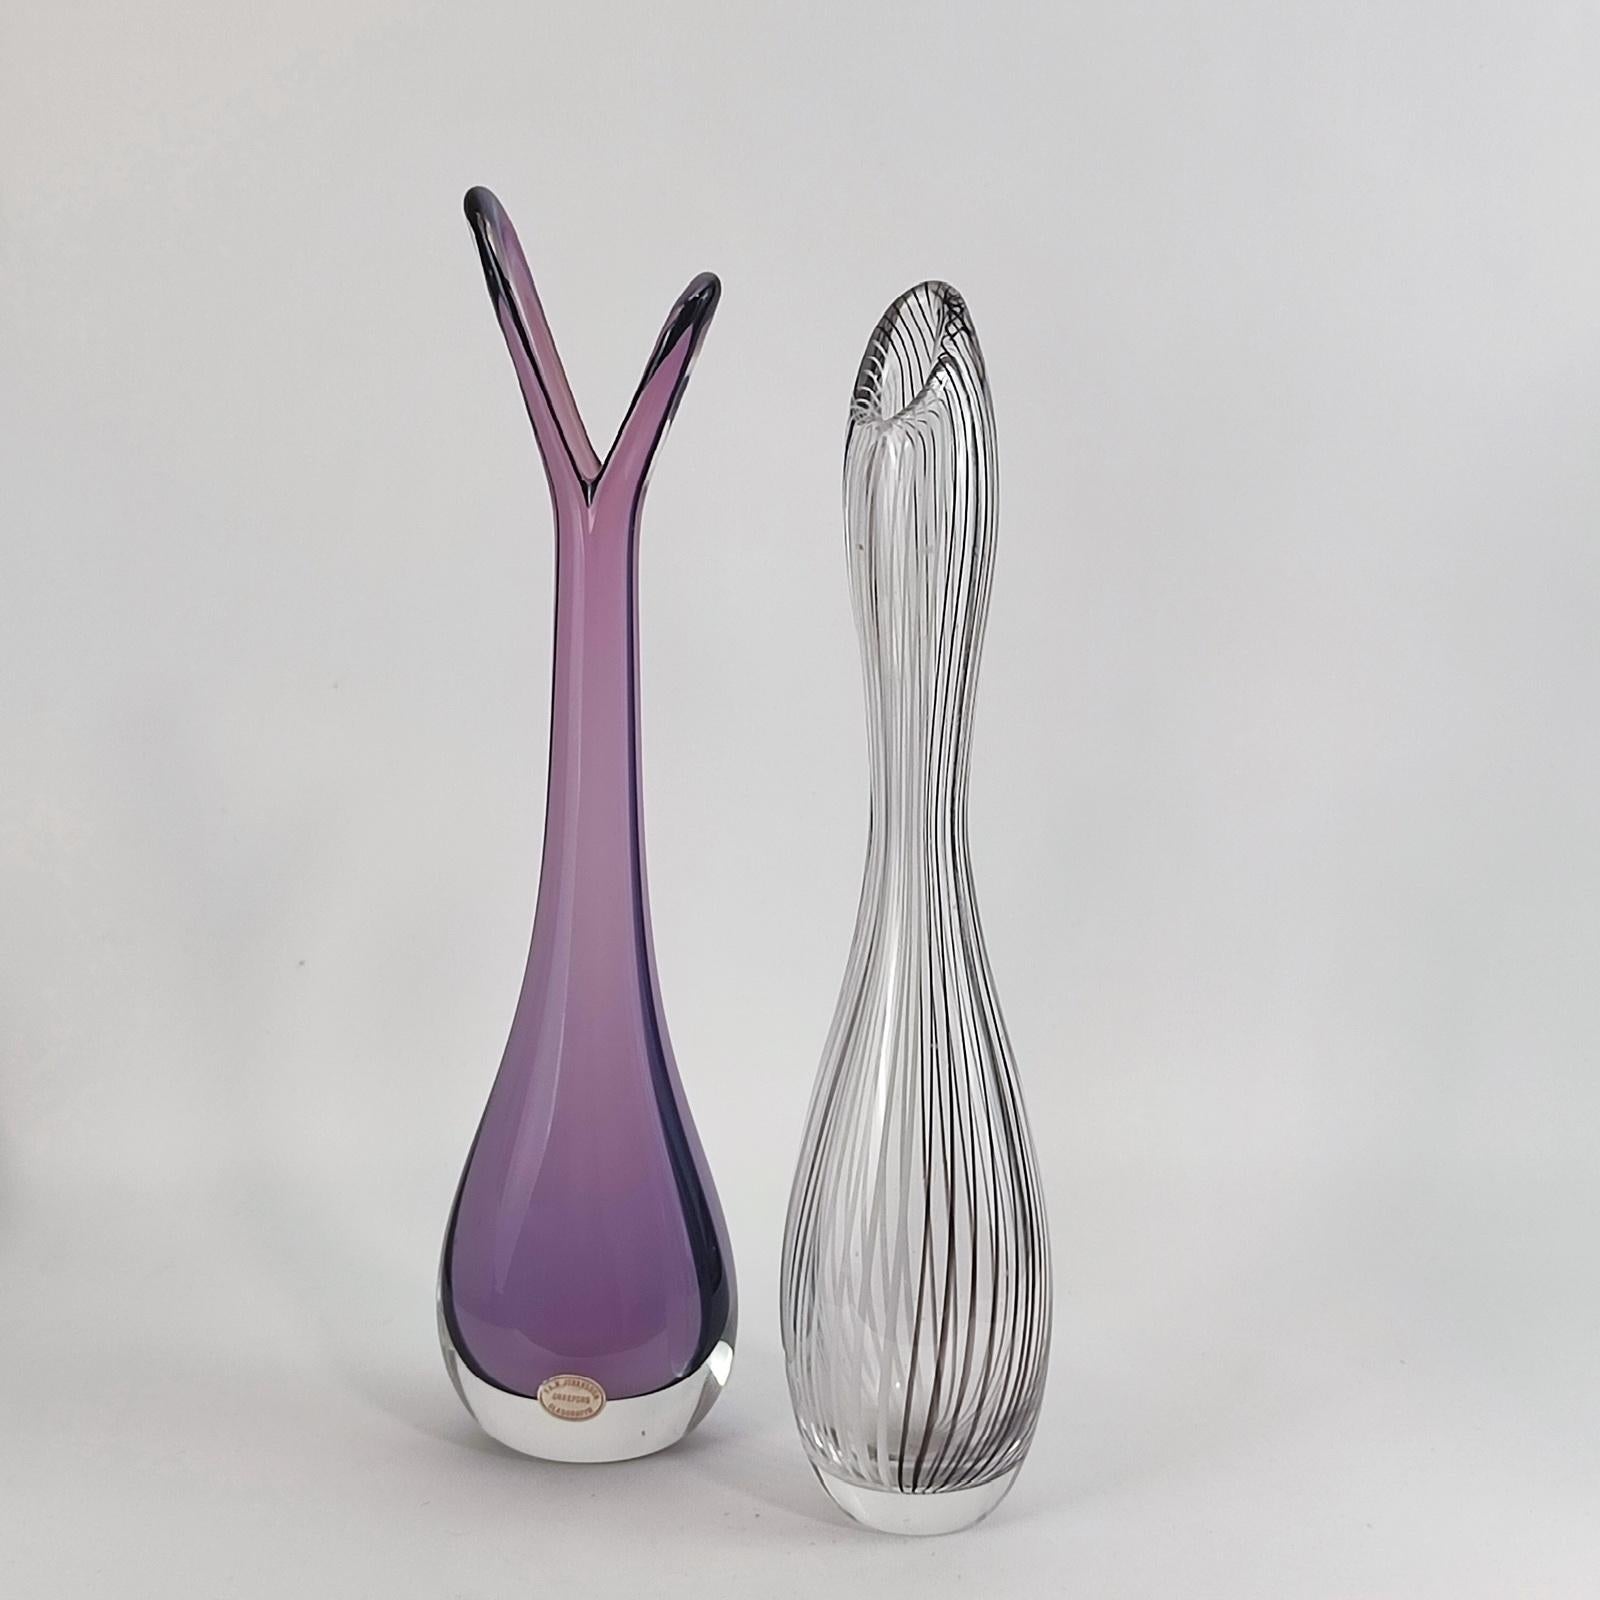 Vintage glass vase, designed by Vicke Lindstrand for Kosta Boda. Thick blown glass with white and purple stripes. Marked under the bottom.
Excellent condition.
Dimensions: height 33 cm [13 in.].